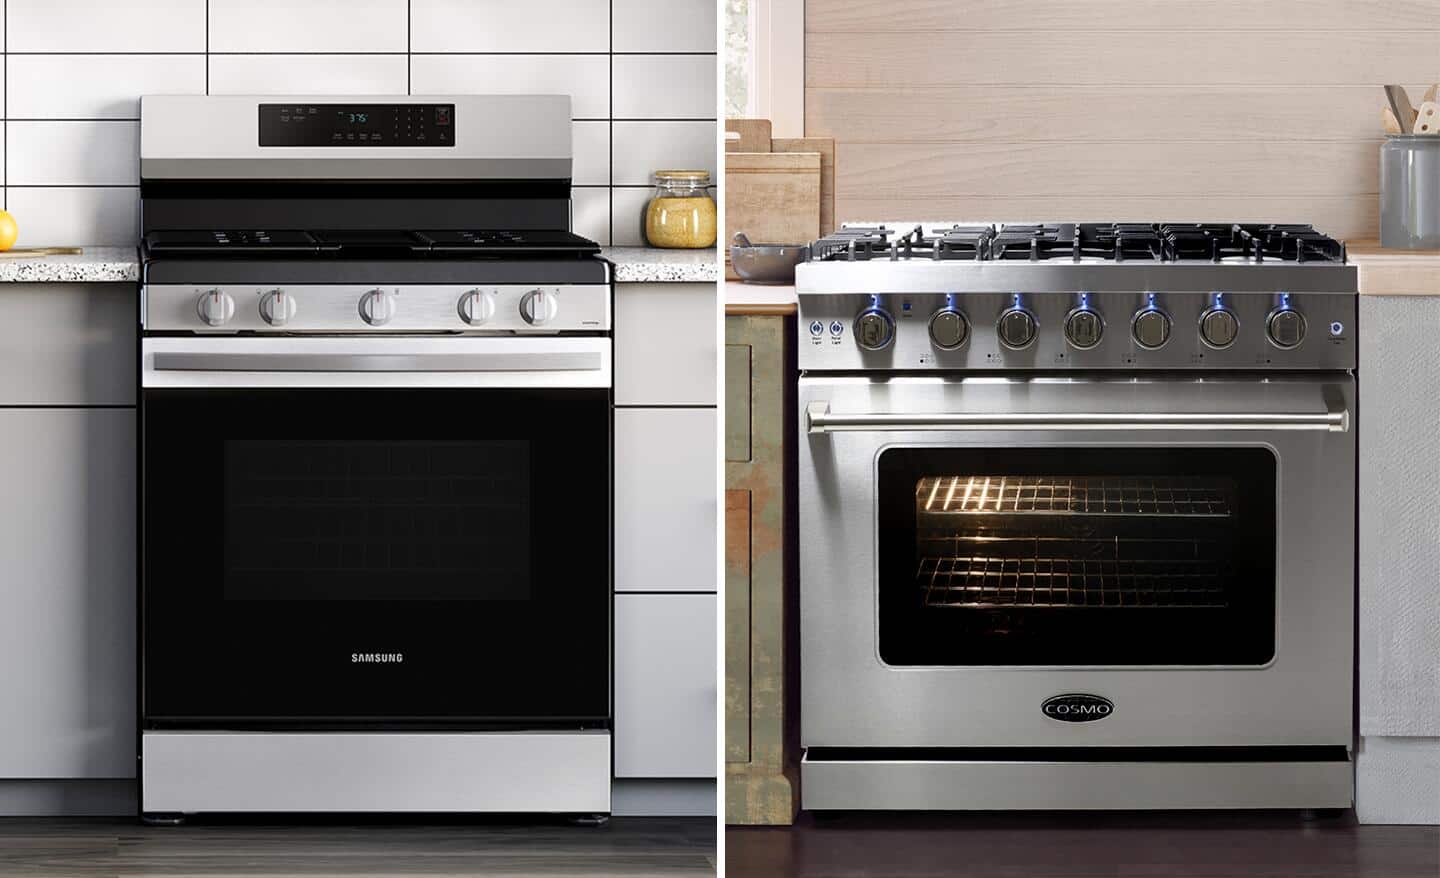 A conventional oven and a convection oven featuring a stainless steel finish.